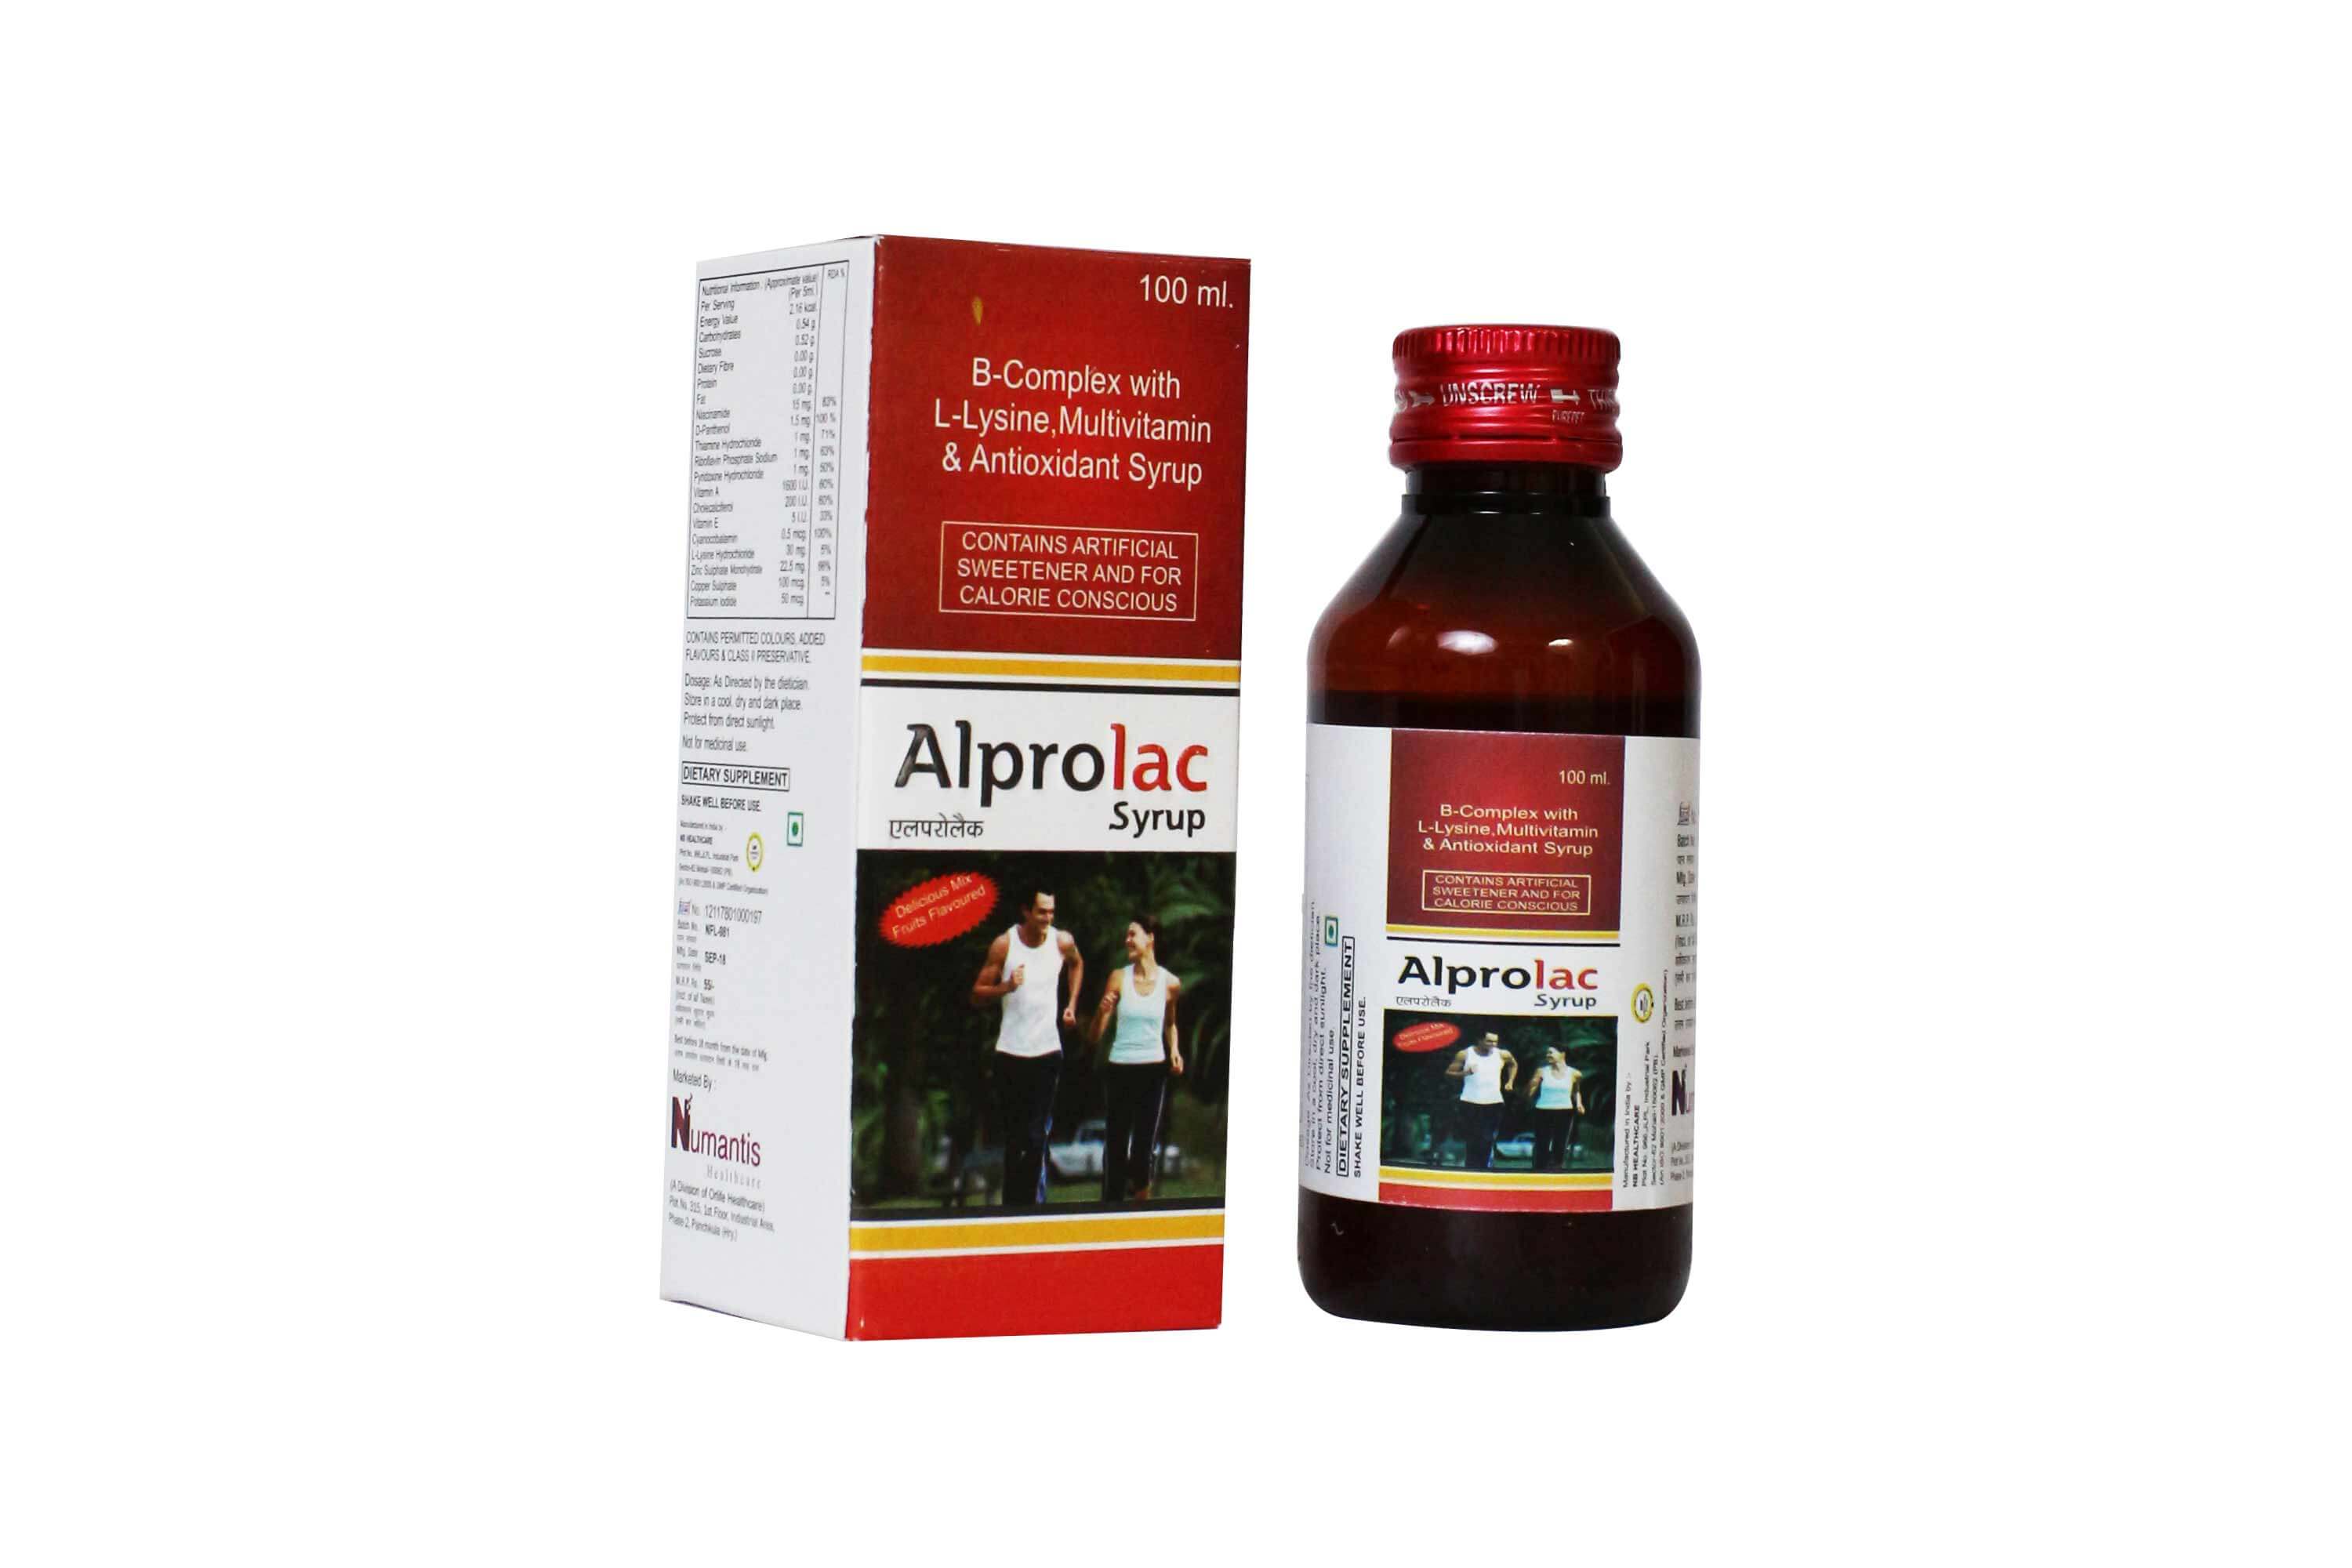 Product Name: Alprolac Syrup, Compositions of Alprolac Syrup are B-Complex with L-Lysine, Multivitamin & Antioxidant Syrup - Numantis Healthcare